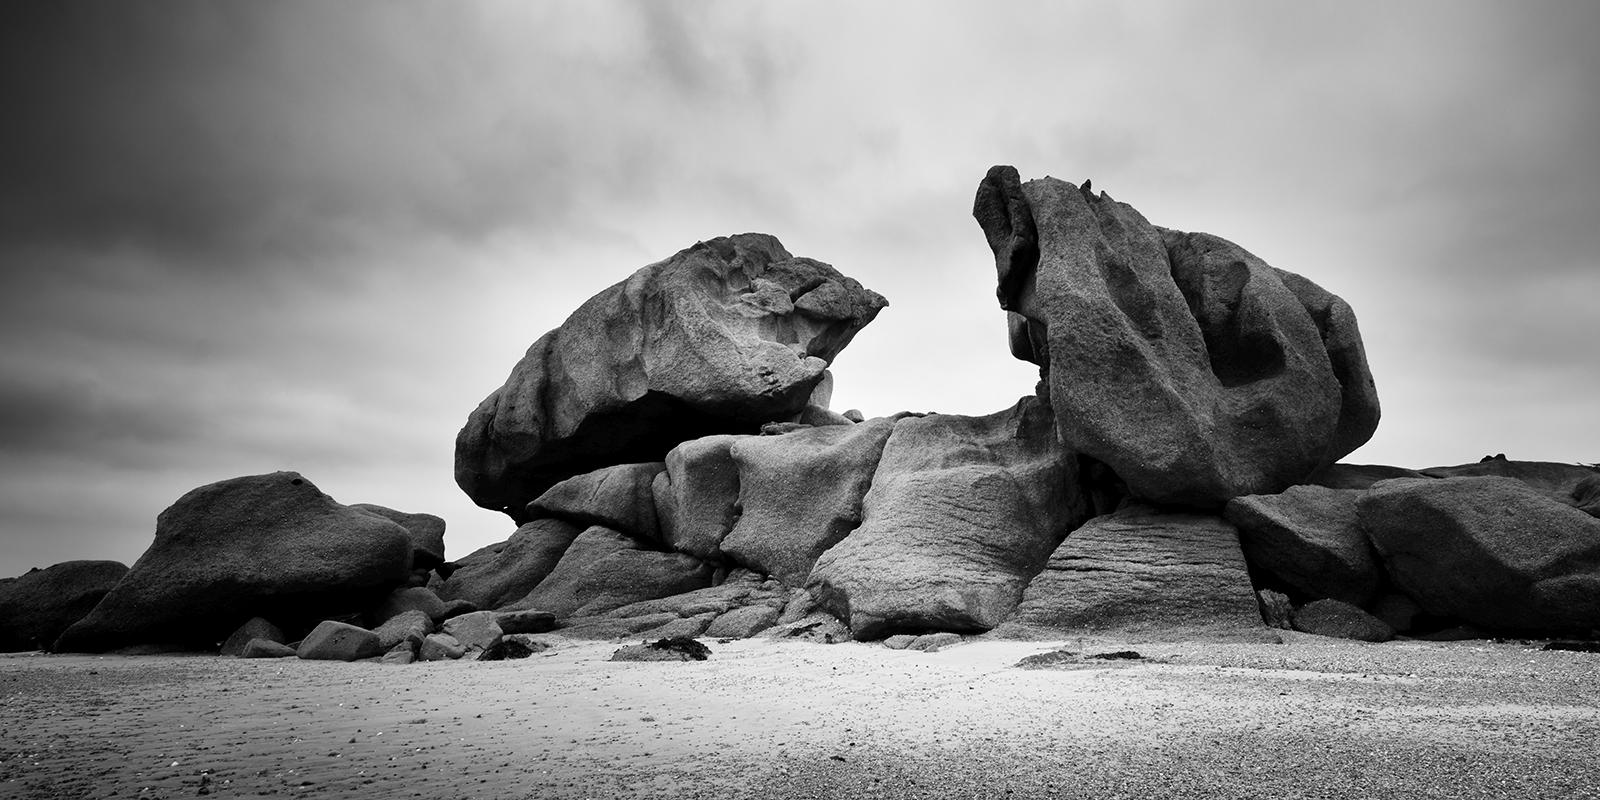 Gerald Berghammer Black and White Photograph - Crab Claws Rock, Panorama, Granite Coast, black and white landscape photography